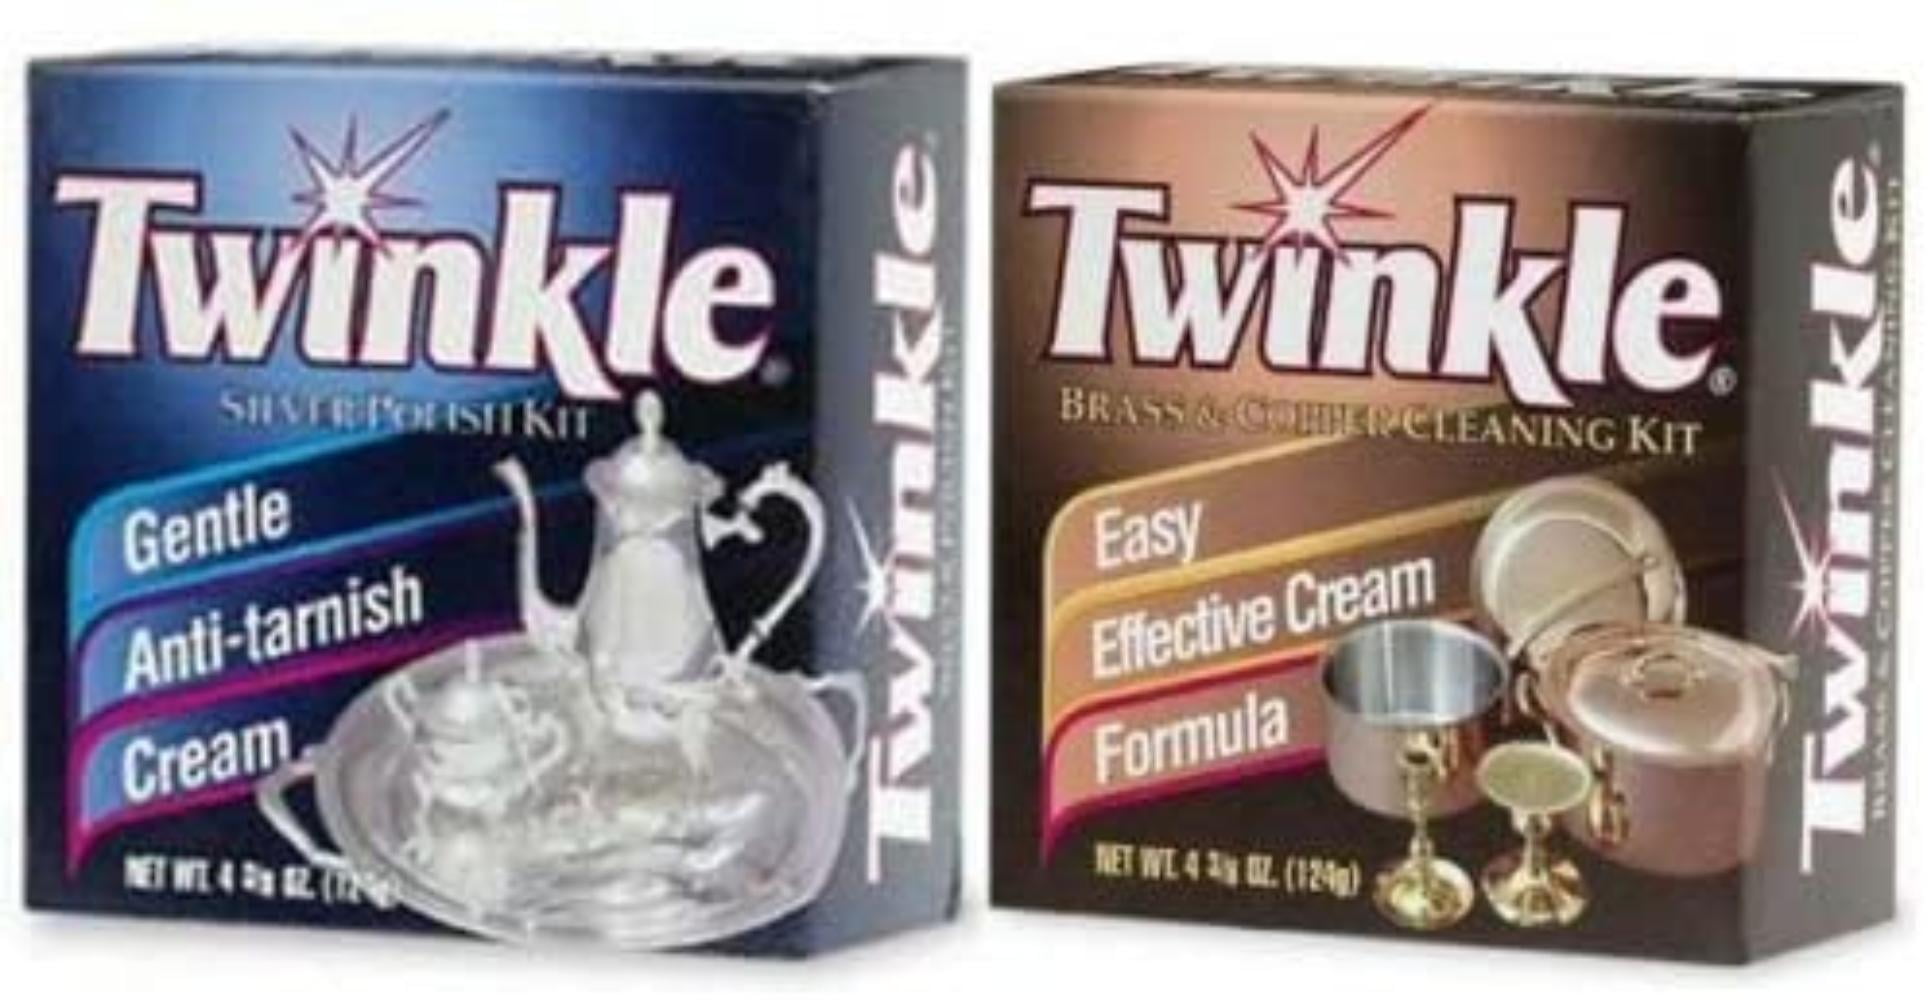 Twinkle Brass & Copper Cleaner Polish Kit  6 Pack New 